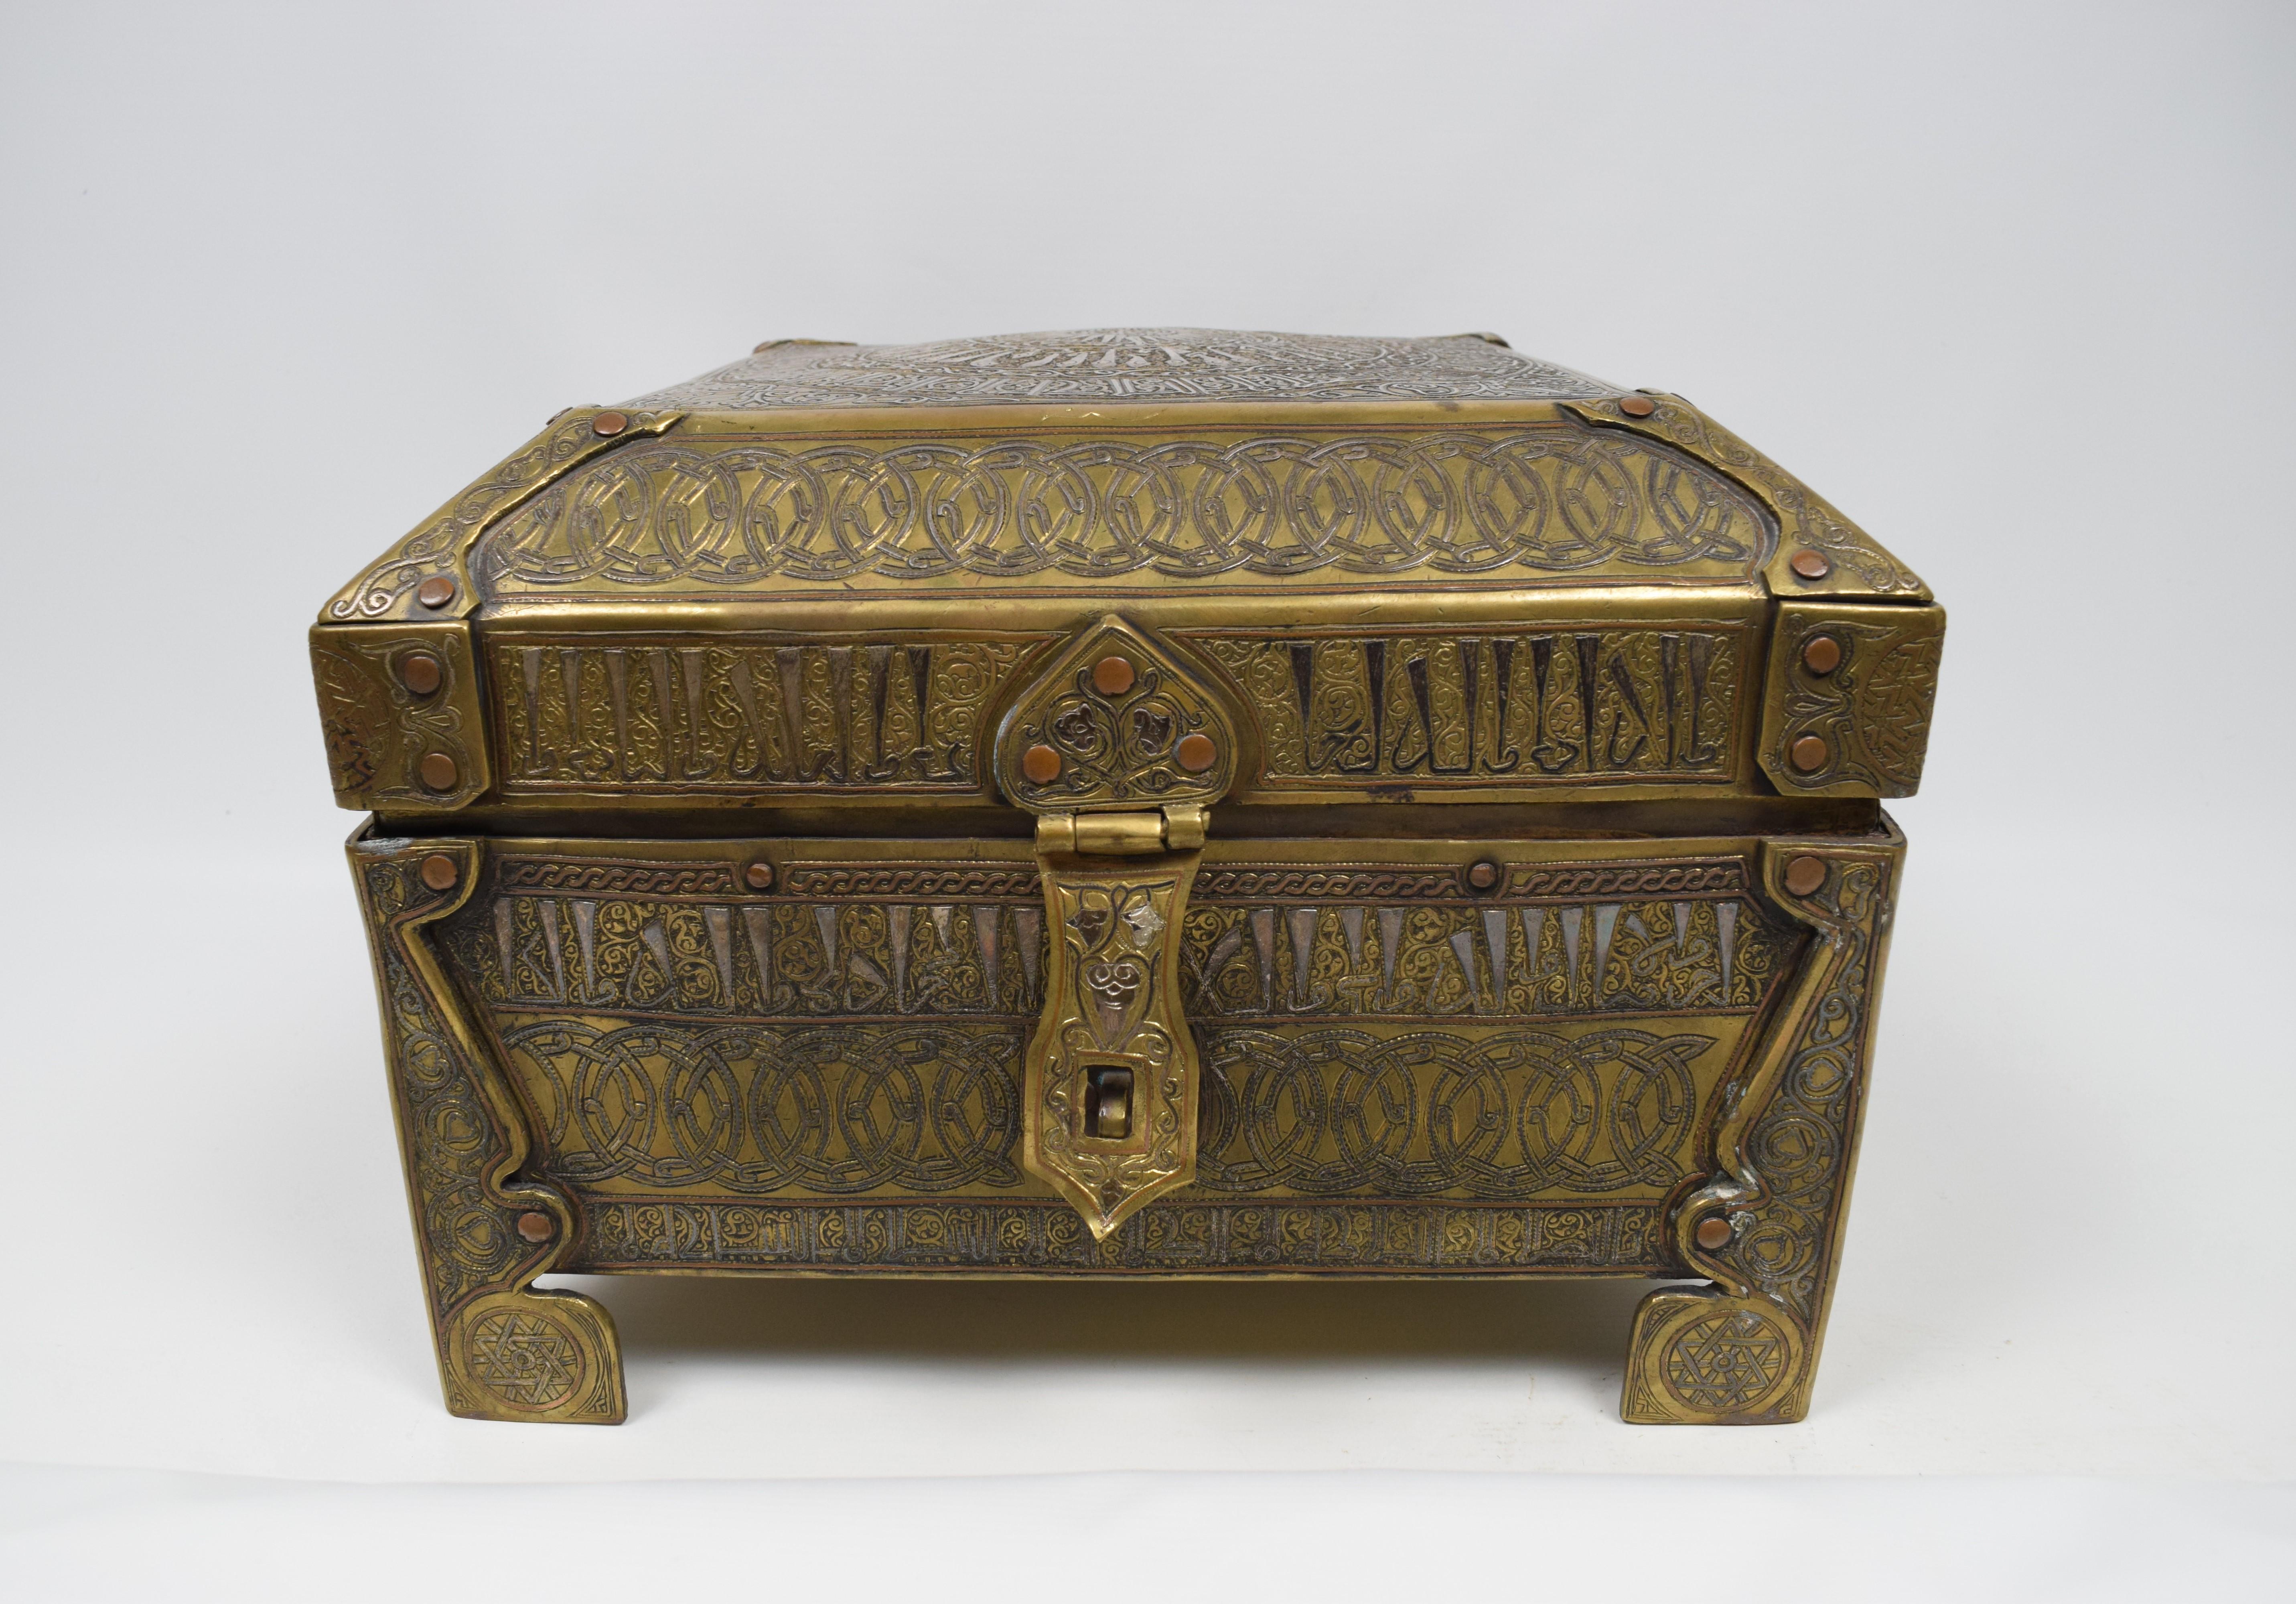 Islamic Middle Eastern brass with silver inlaid Calligraphy box, Mamluk Cairoware 19th century

Mamluk Revival Cairoware: It was made in the 19th and 20th centuries. It was a mix of the early Mamluk style, European styles, and ancient Egyptian